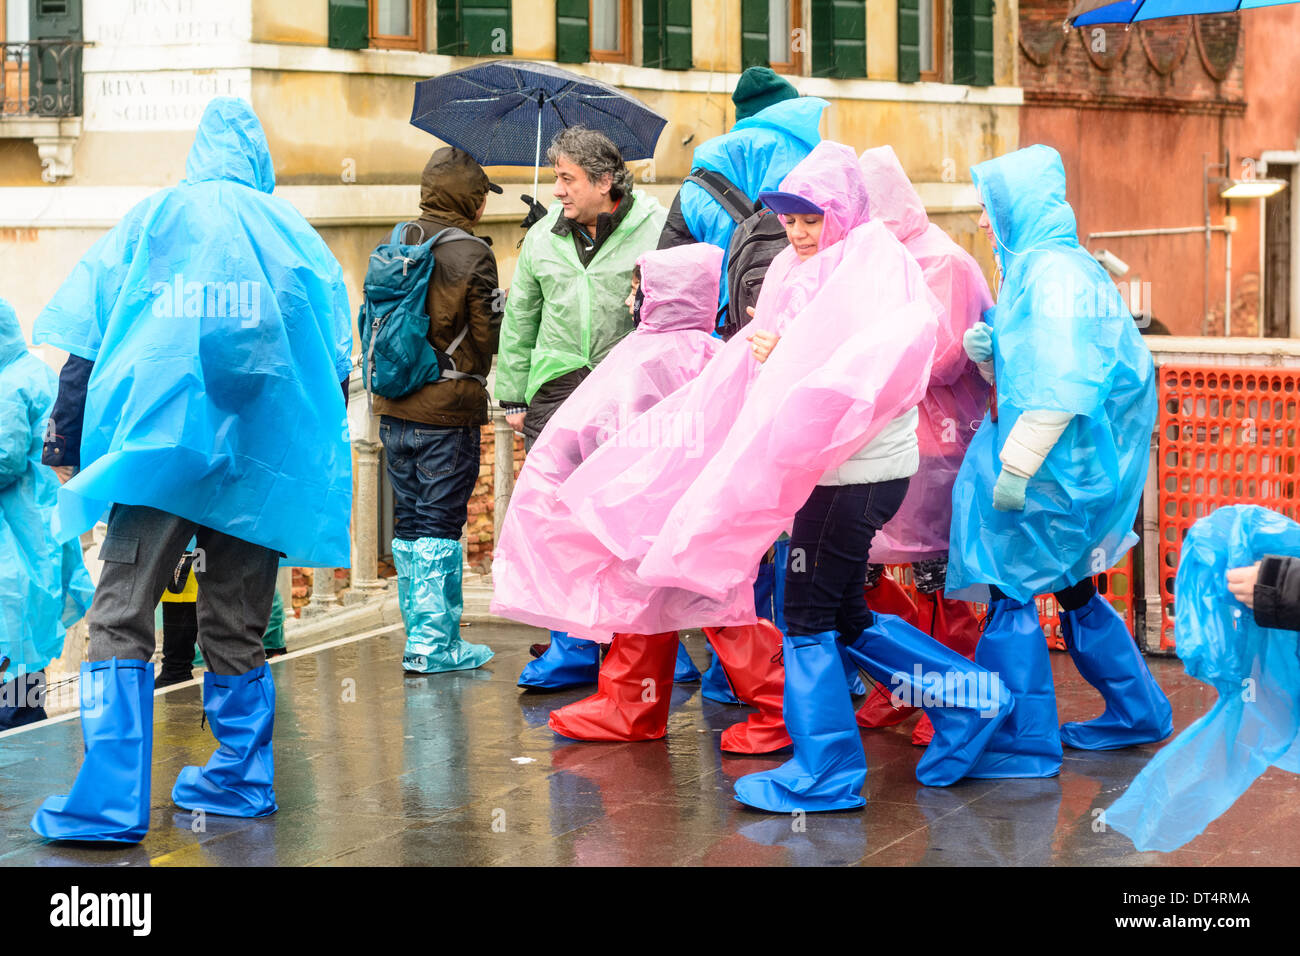 Venice, Italy. People in wet weather clothing, rain ponchos, and rain boots, standing on bridge during rain. Stock Photo